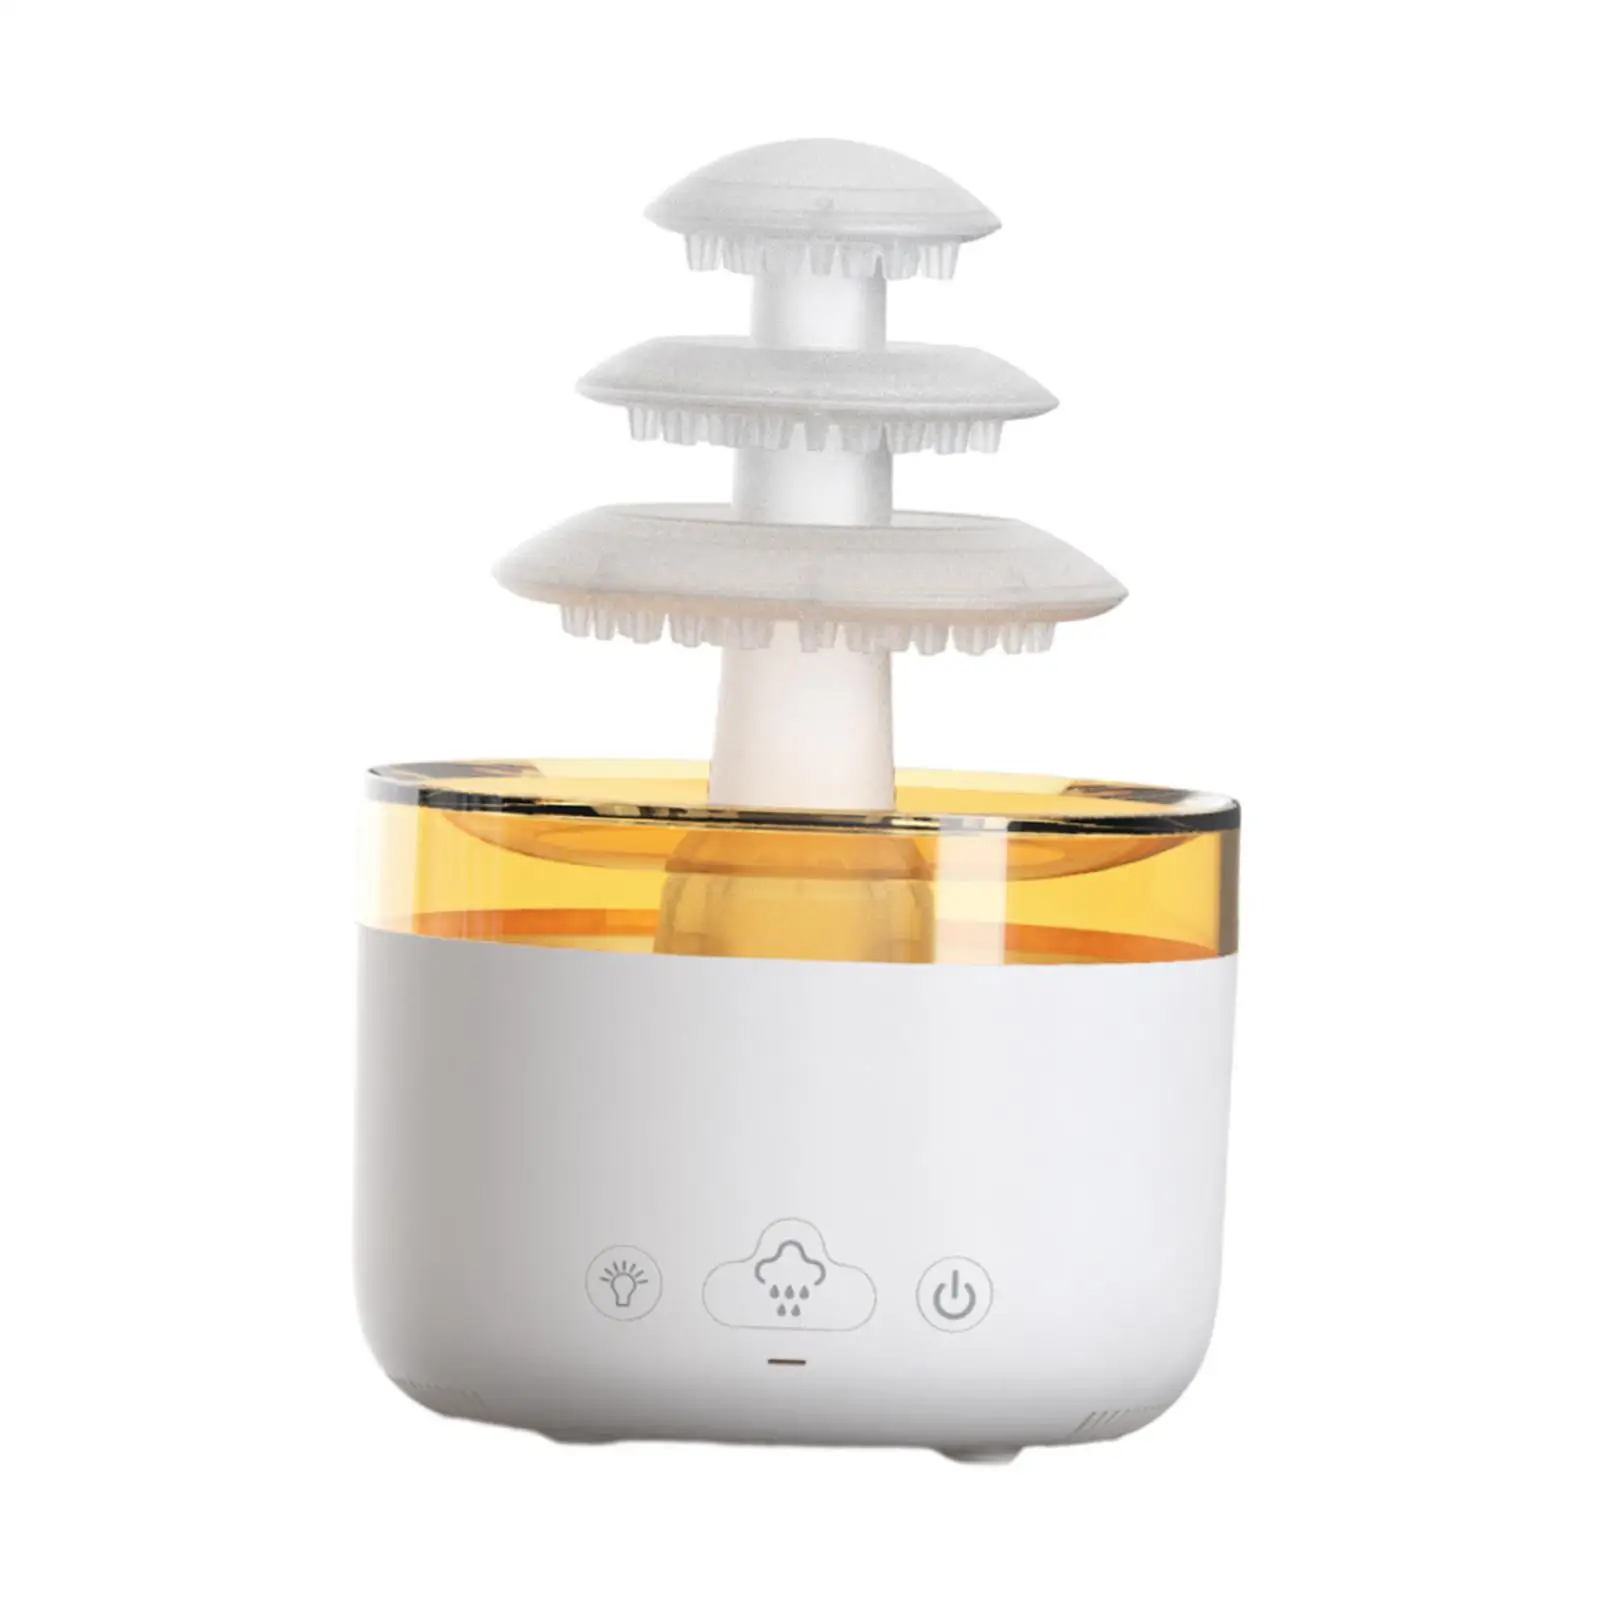 Essential Oil Diffuser Premium Portable Decoration Air Humidifier Mist Diffuser for Office Bedroom Pet Room Large Room Study